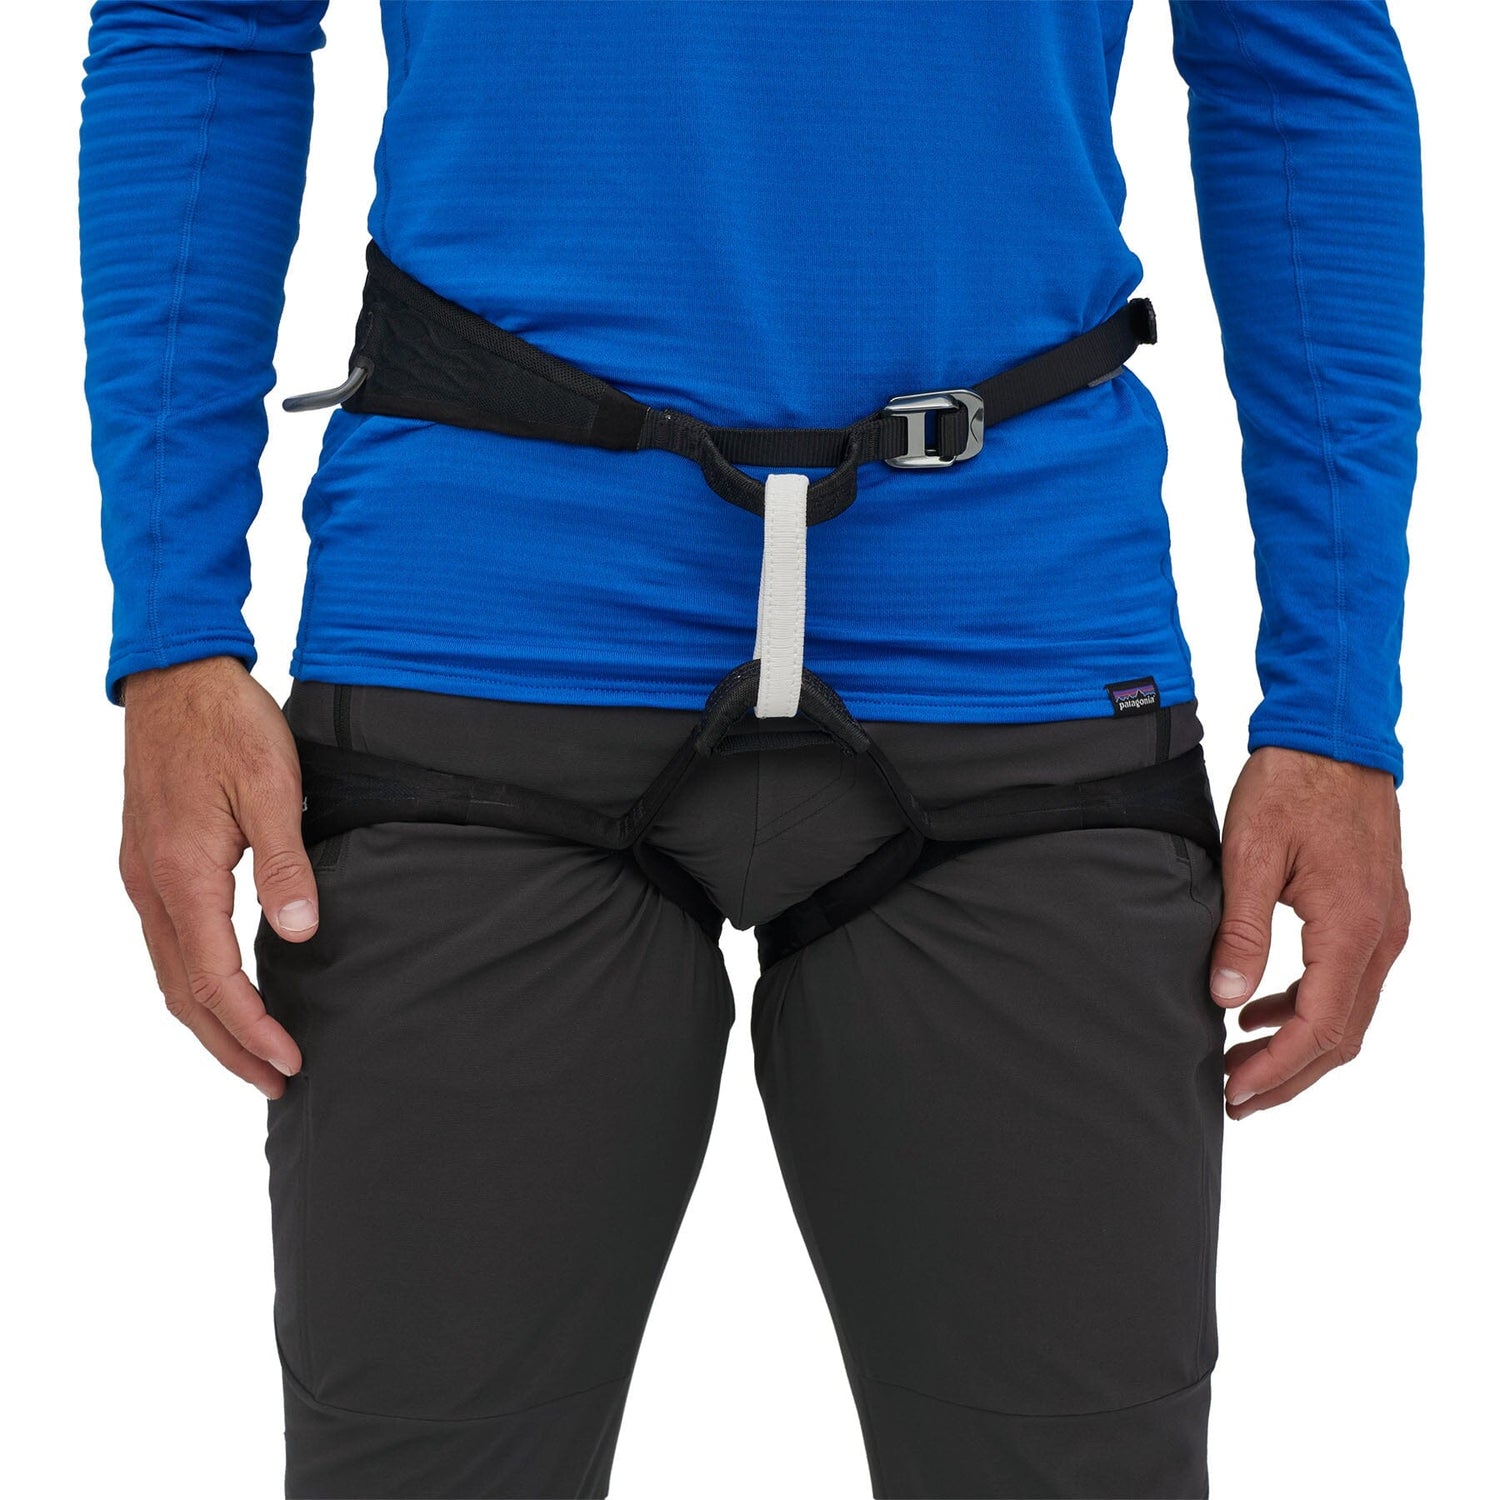 Patagonia - M's Altvia Light Alpine Pants - Recycled Polyester - Weekendbee - sustainable sportswear